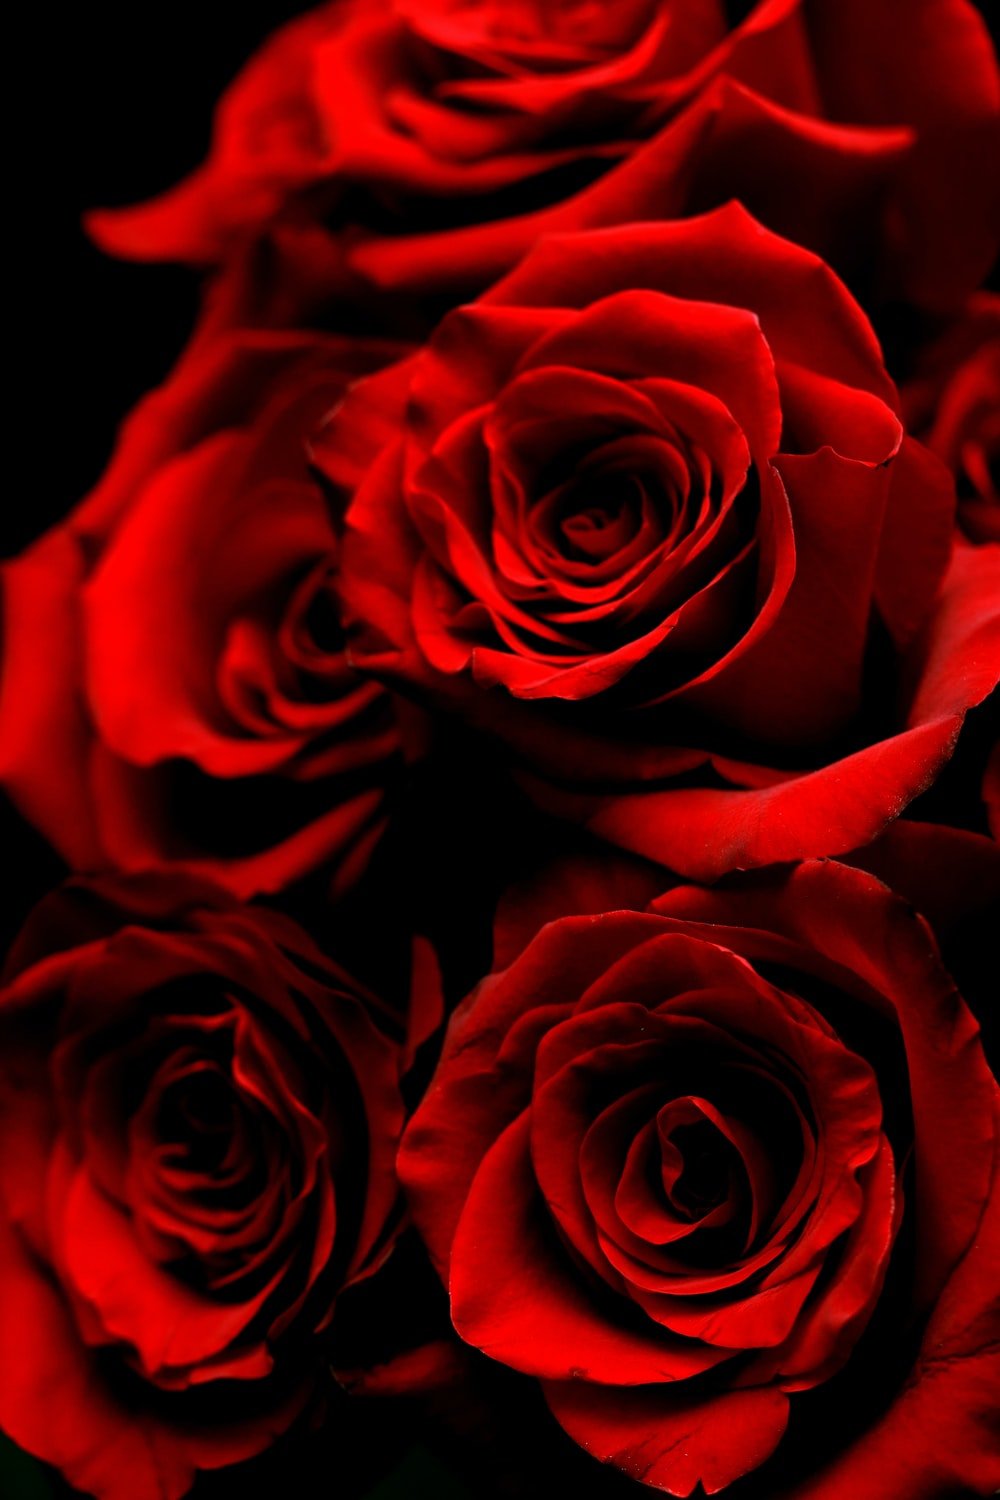 Red Roses Picture. Download Free Image